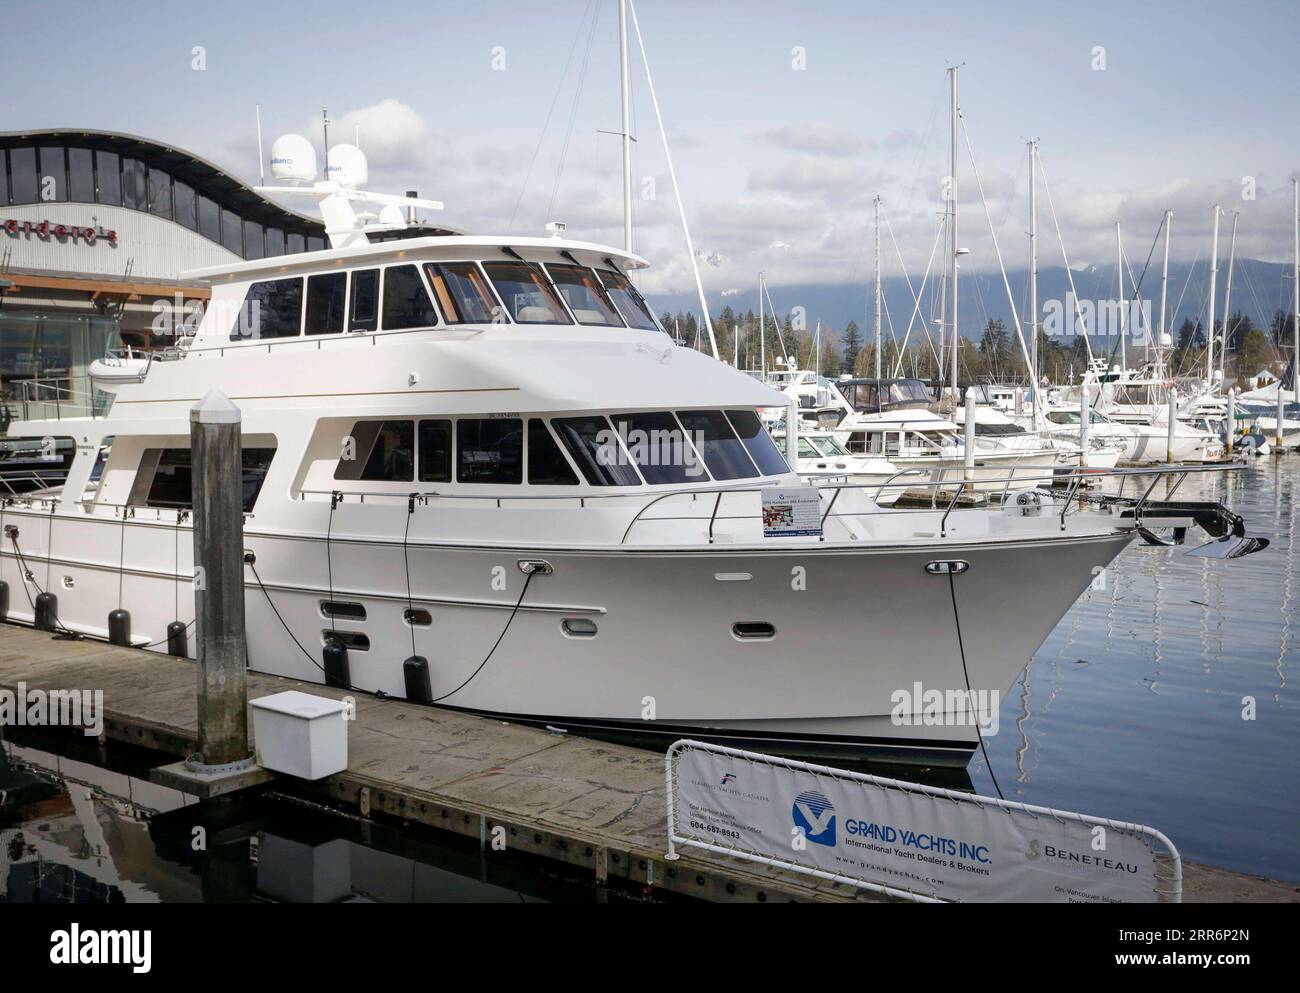 210224 -- VANCOUVER, Feb. 24, 2021 -- A cruiser boat for display during the 2021 Vancouver International Boat Show is seen at a harbour in Vancouver, British Columbia, Canada, Feb. 24, 2021. The Vancouver International Boat Show which goes virtual this year due to the COVID-19 pandemic, kicked off on Wednesday, showcasing hundreds of new boats, products and accessories online. Photo by /Xinhua CANADA-VANCOUVER-INTERNATIONAL BOAT SHOW LiangxSen PUBLICATIONxNOTxINxCHN Stock Photo